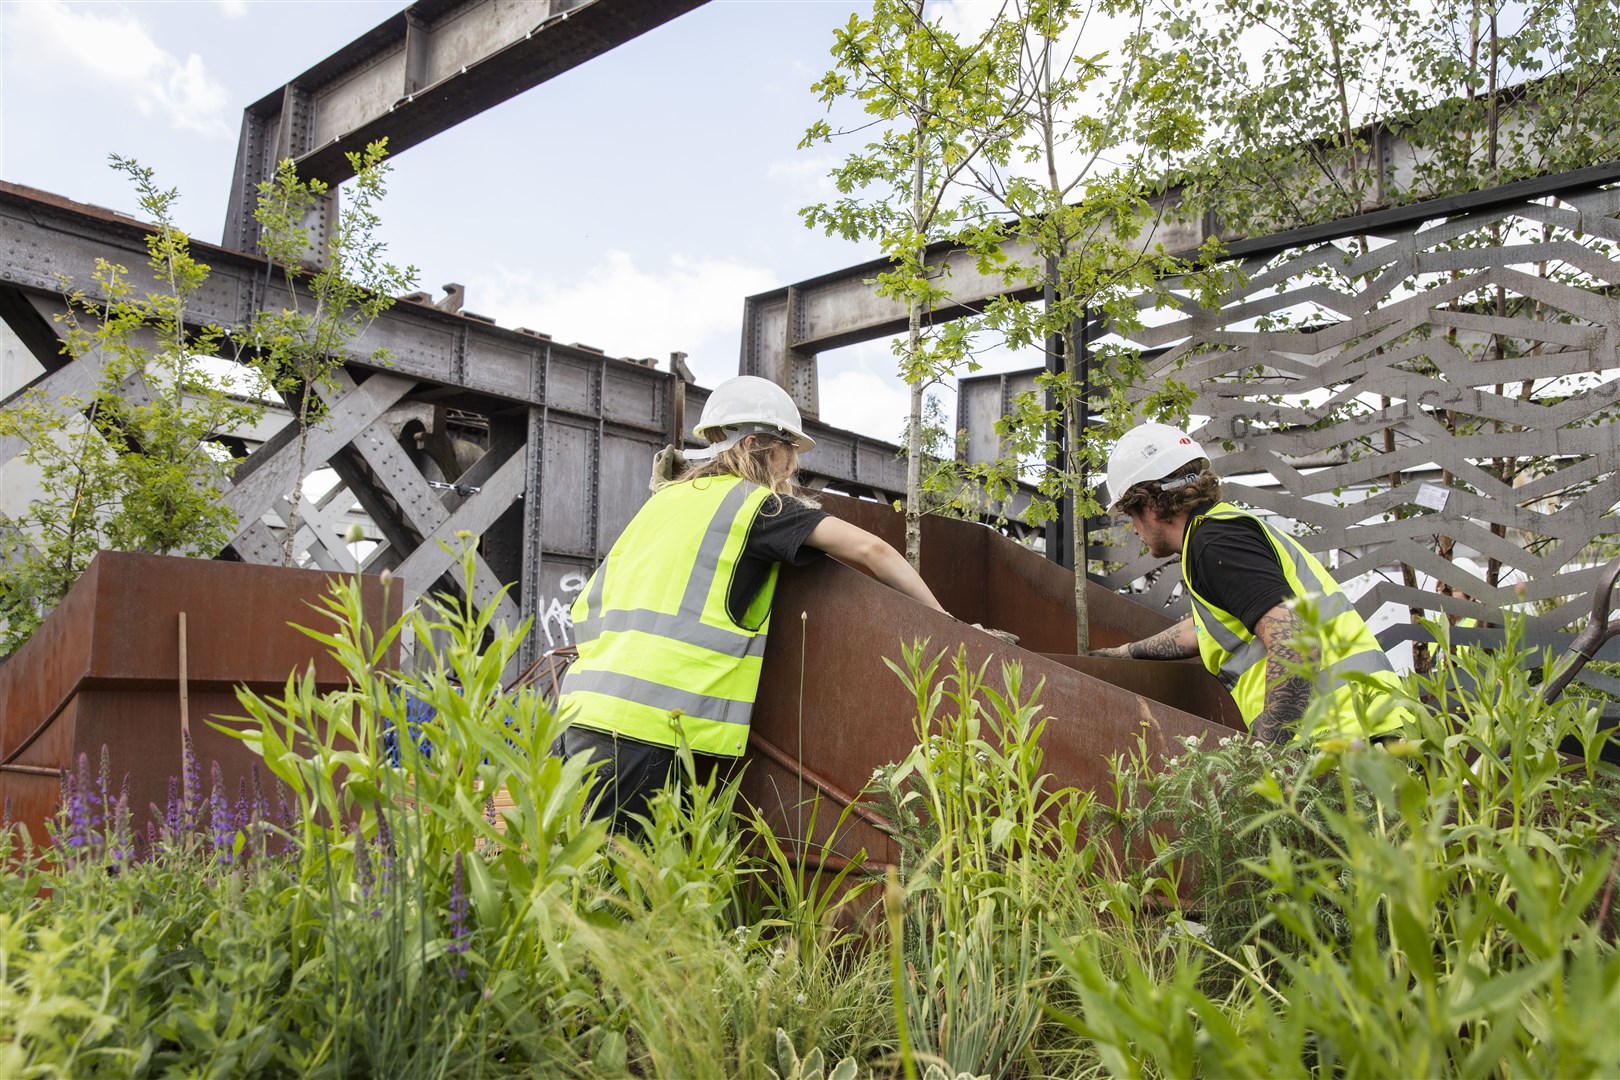 National Trust gardeners planting at the Castlefield Viaduct in Manchester (Annapurna Mellor/National Trust/PA)